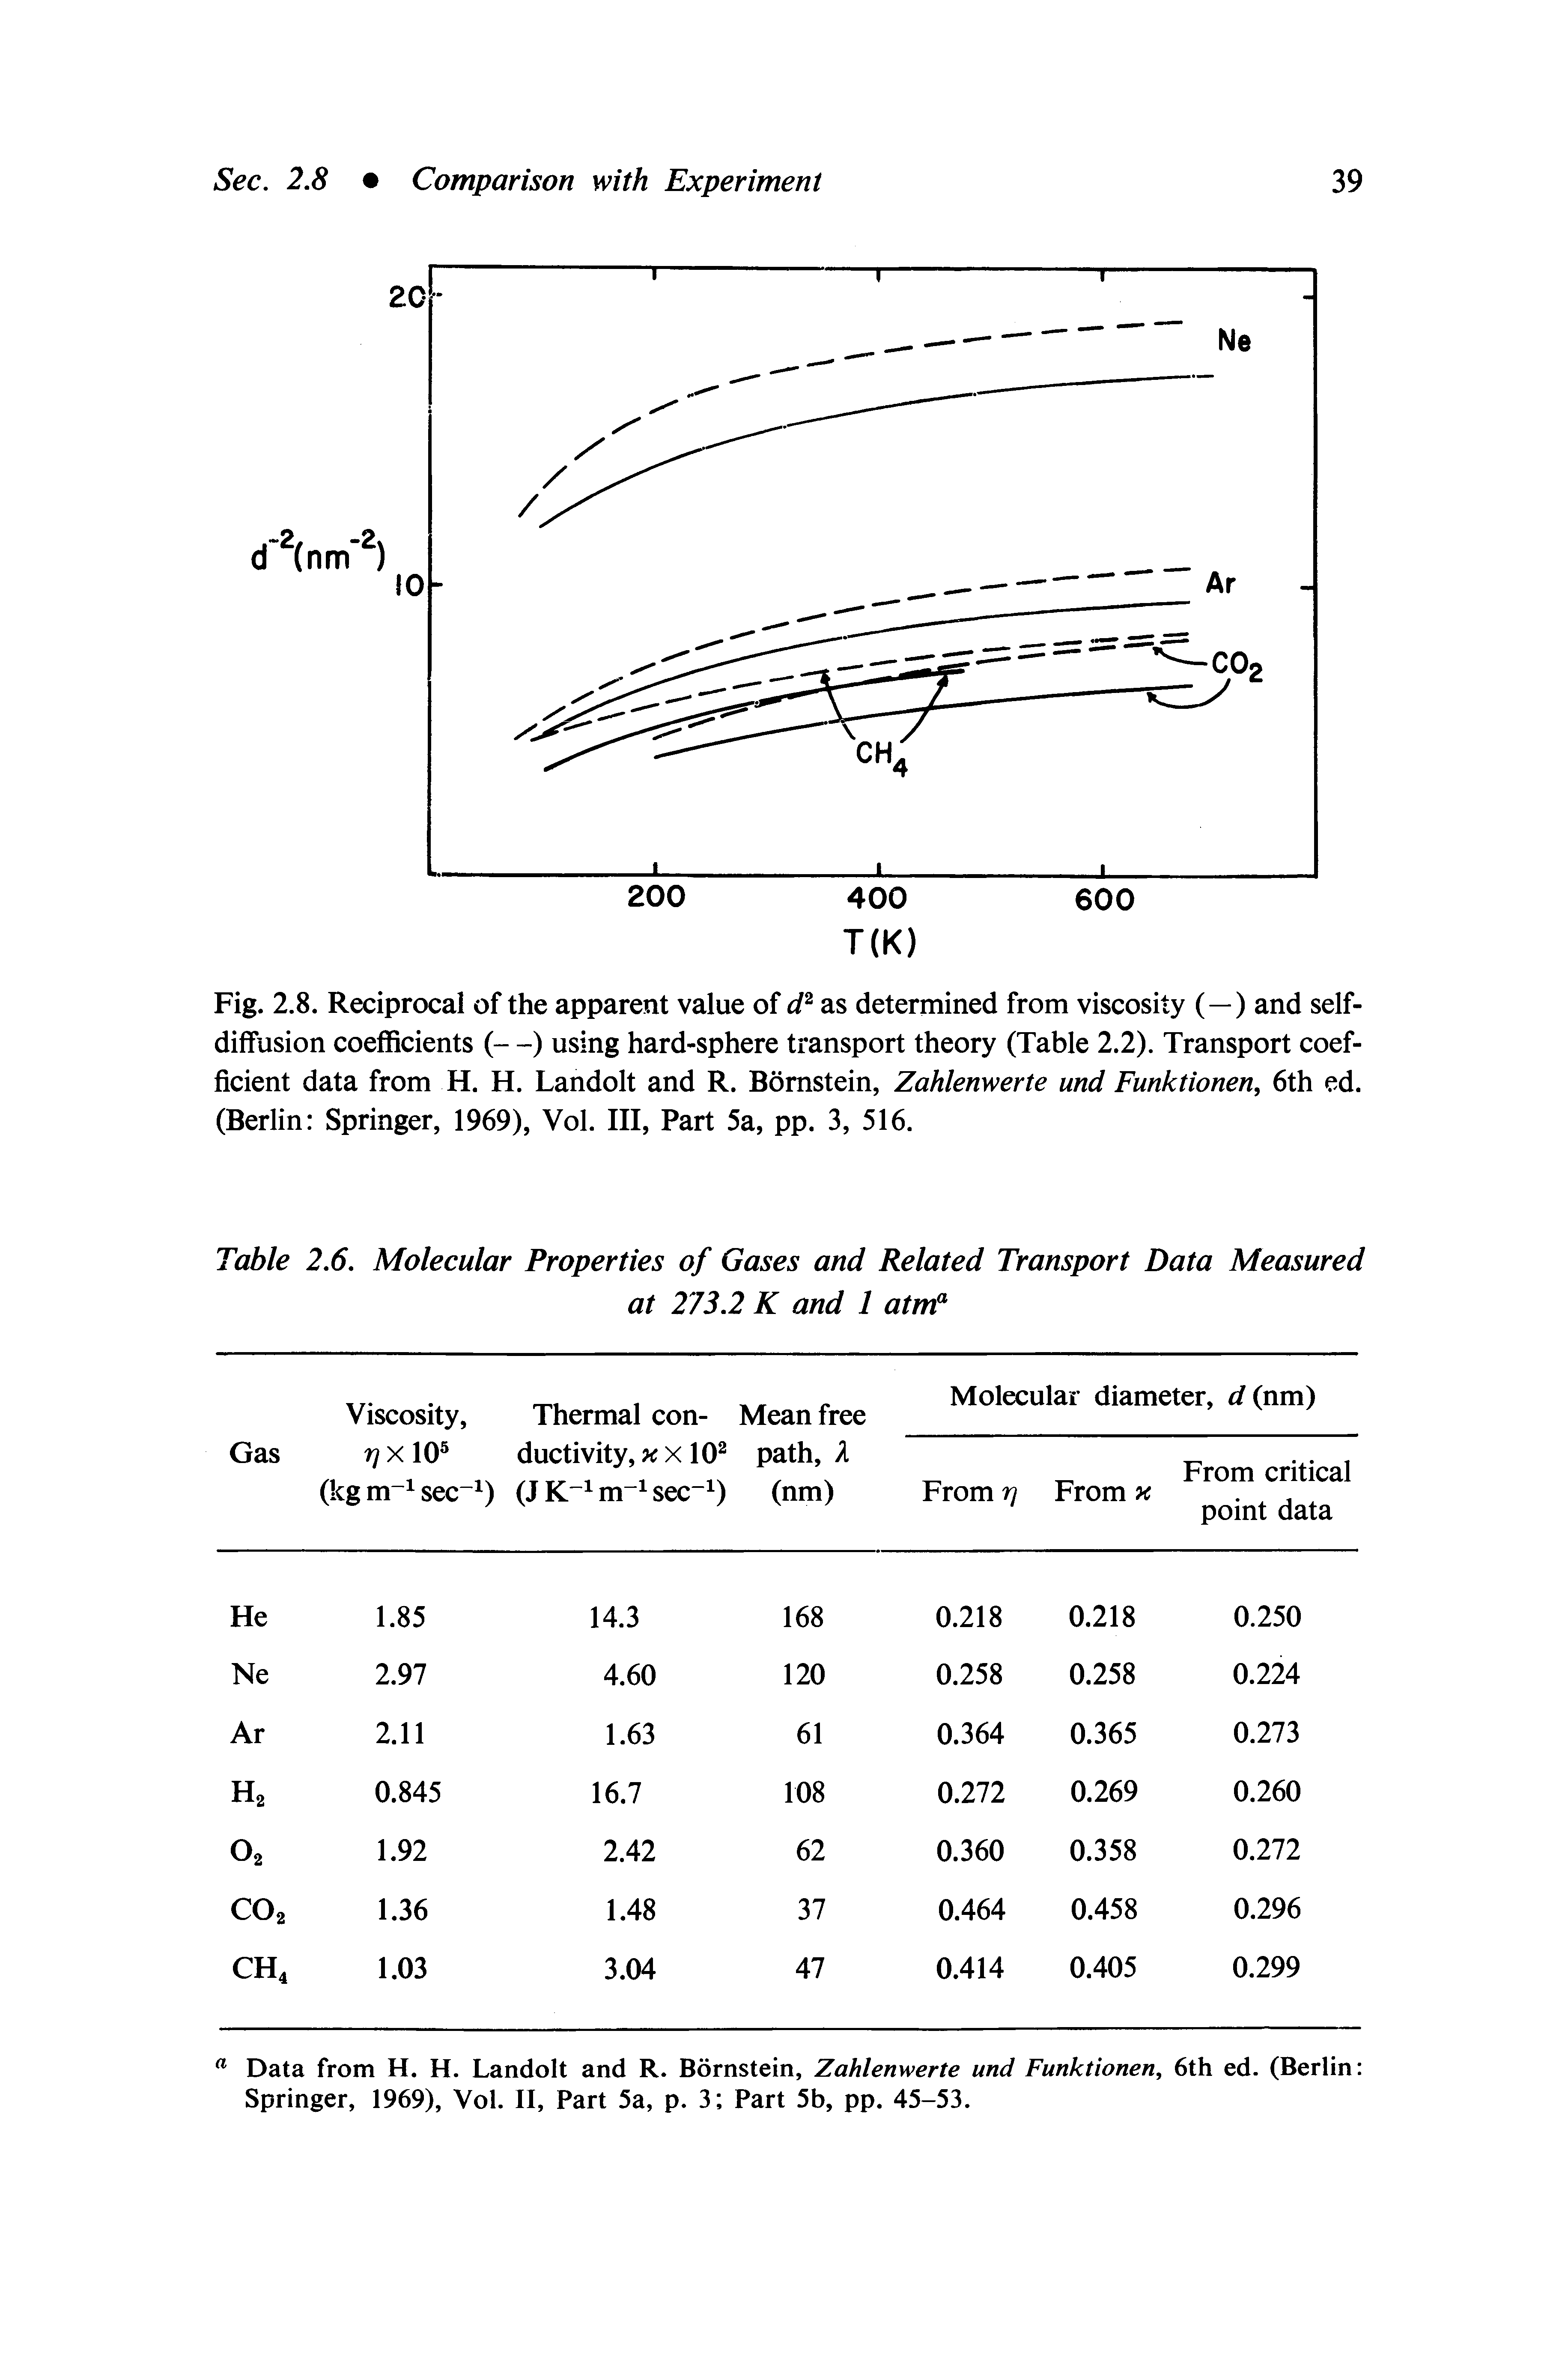 Fig. 2.8. Reciprocal of the apparent value of as determined from viscosity (—) and self-diffusion coefficients (- -) using hard-sphere transport theory (Table 2.2). Transport coefficient data from H. H. Landolt and R. Bomstein, Zahlenwerte and Funktionen, 6th ed. (Berlin Springer, 1969), Vol. Ill, Part 5a, pp. 3, 516.